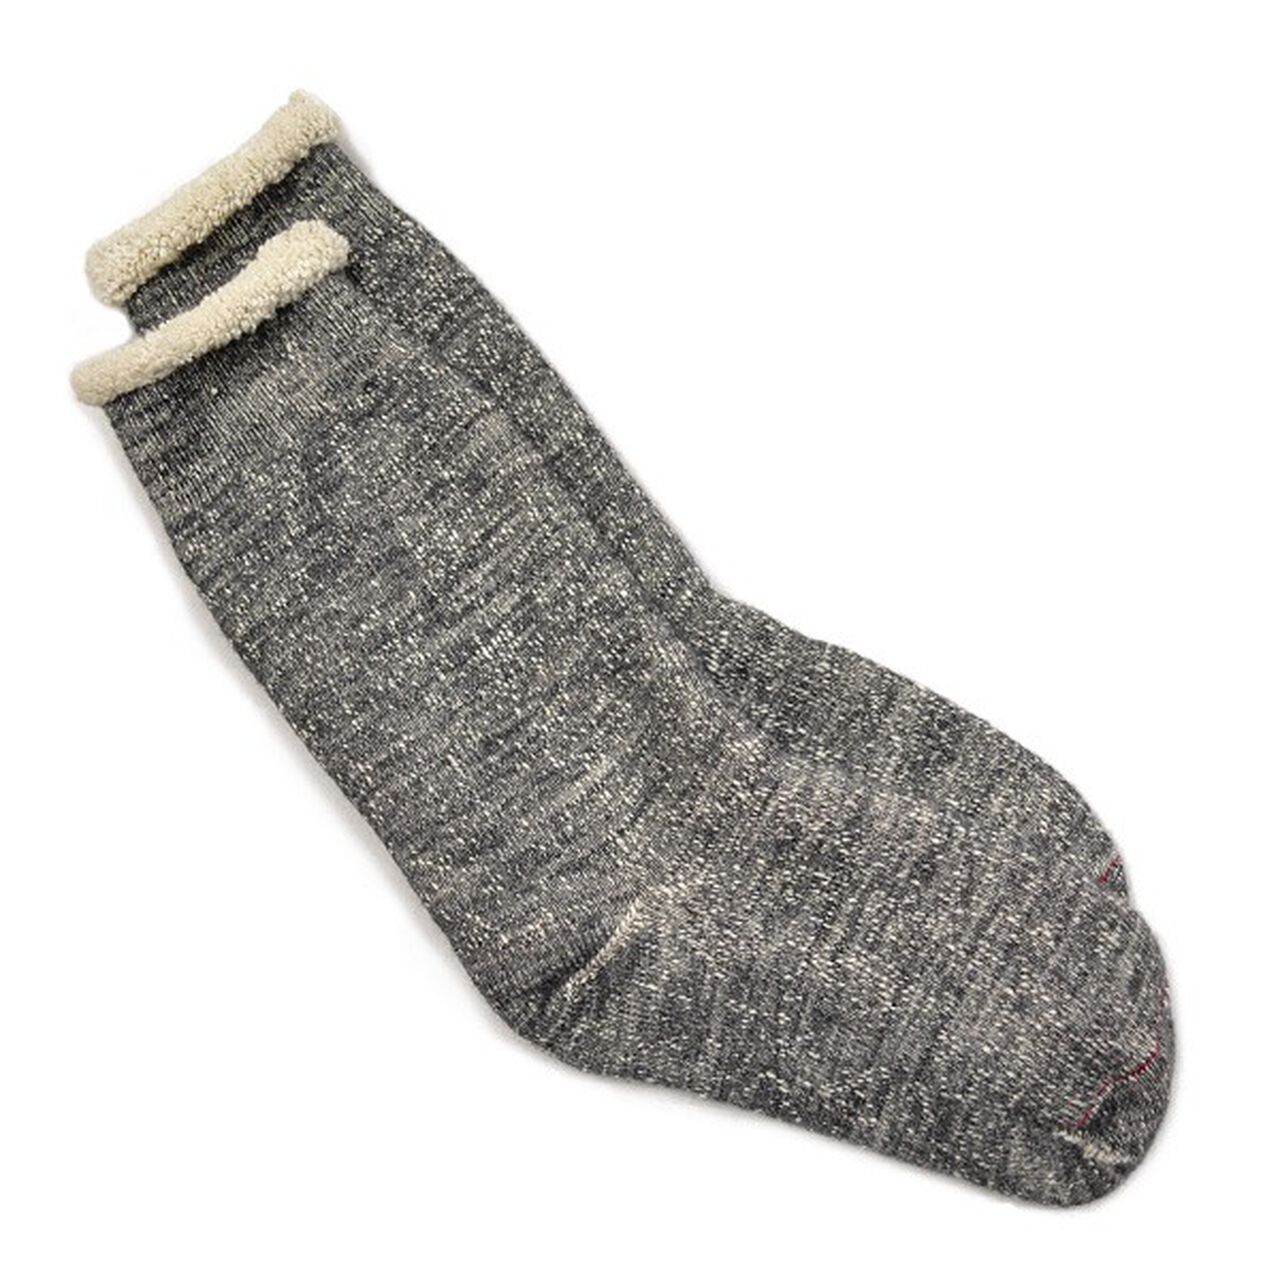 R1001 Double Face Socks,Charcoal, large image number 0